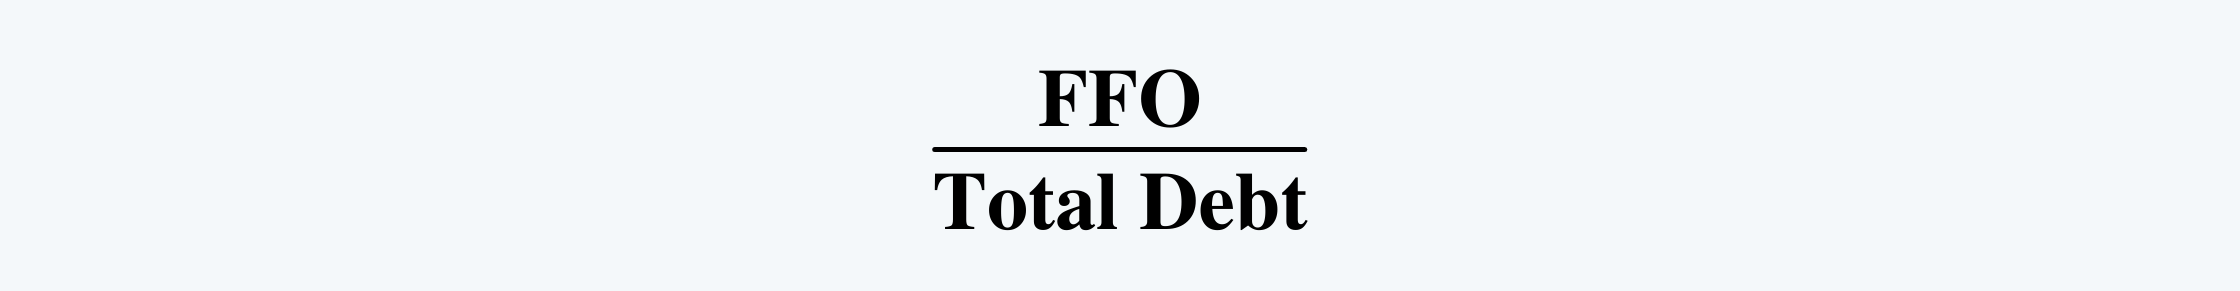 Funds to Debt FRA CFA Level 1 Study Notes